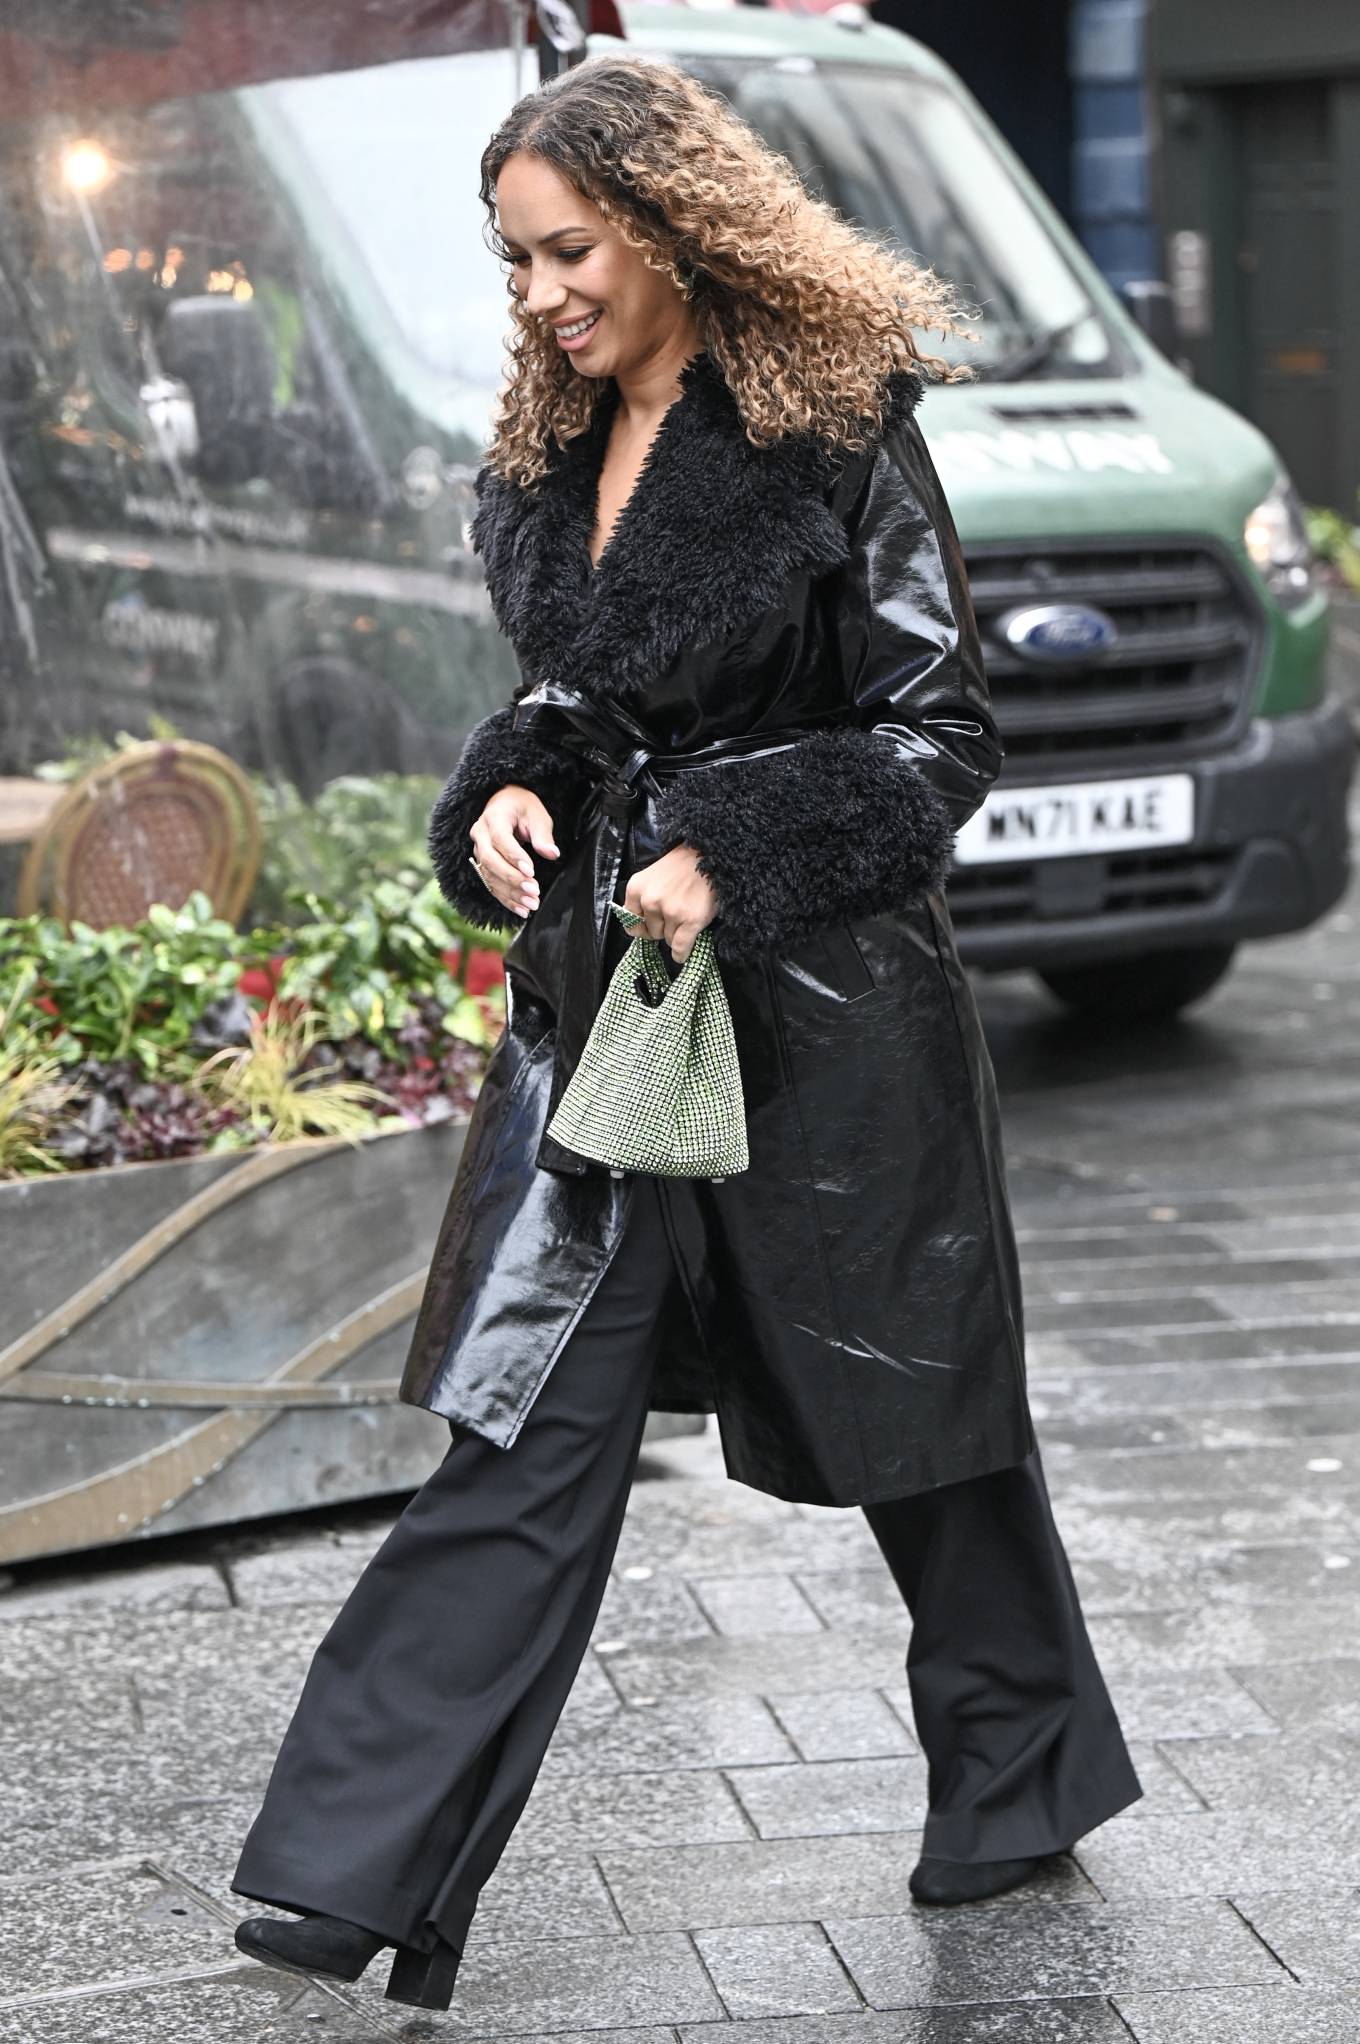 Leona Lewis - Stepping out at Heart radio studios in London